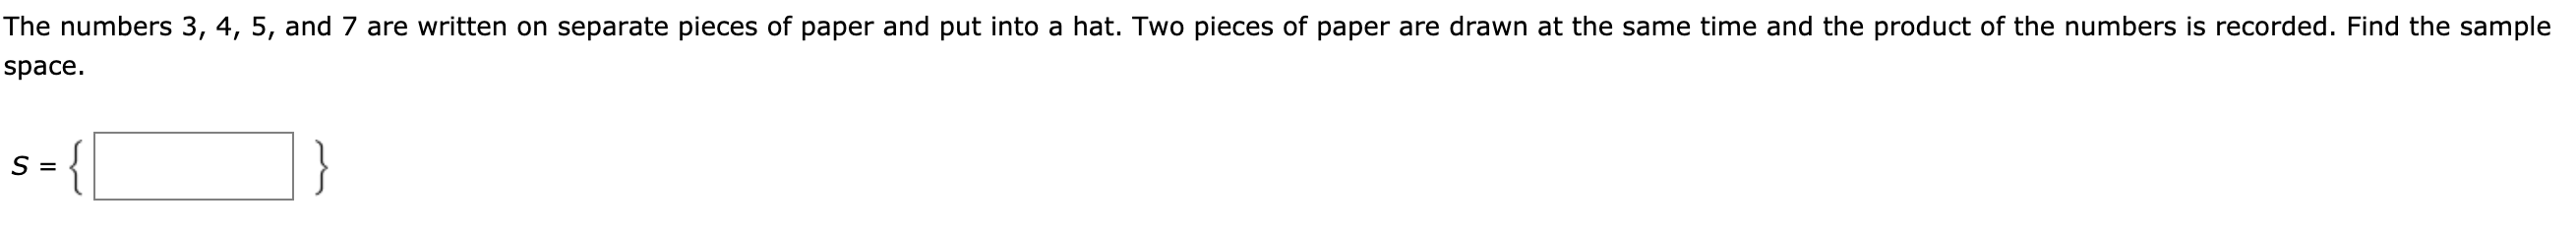 The numbers 3, 4, 5, and 7 are written on separate pieces of paper and put into a hat. Two pieces of paper are drawn at the same time and the product of the numbers is recorded. Find the sample
Брace.
